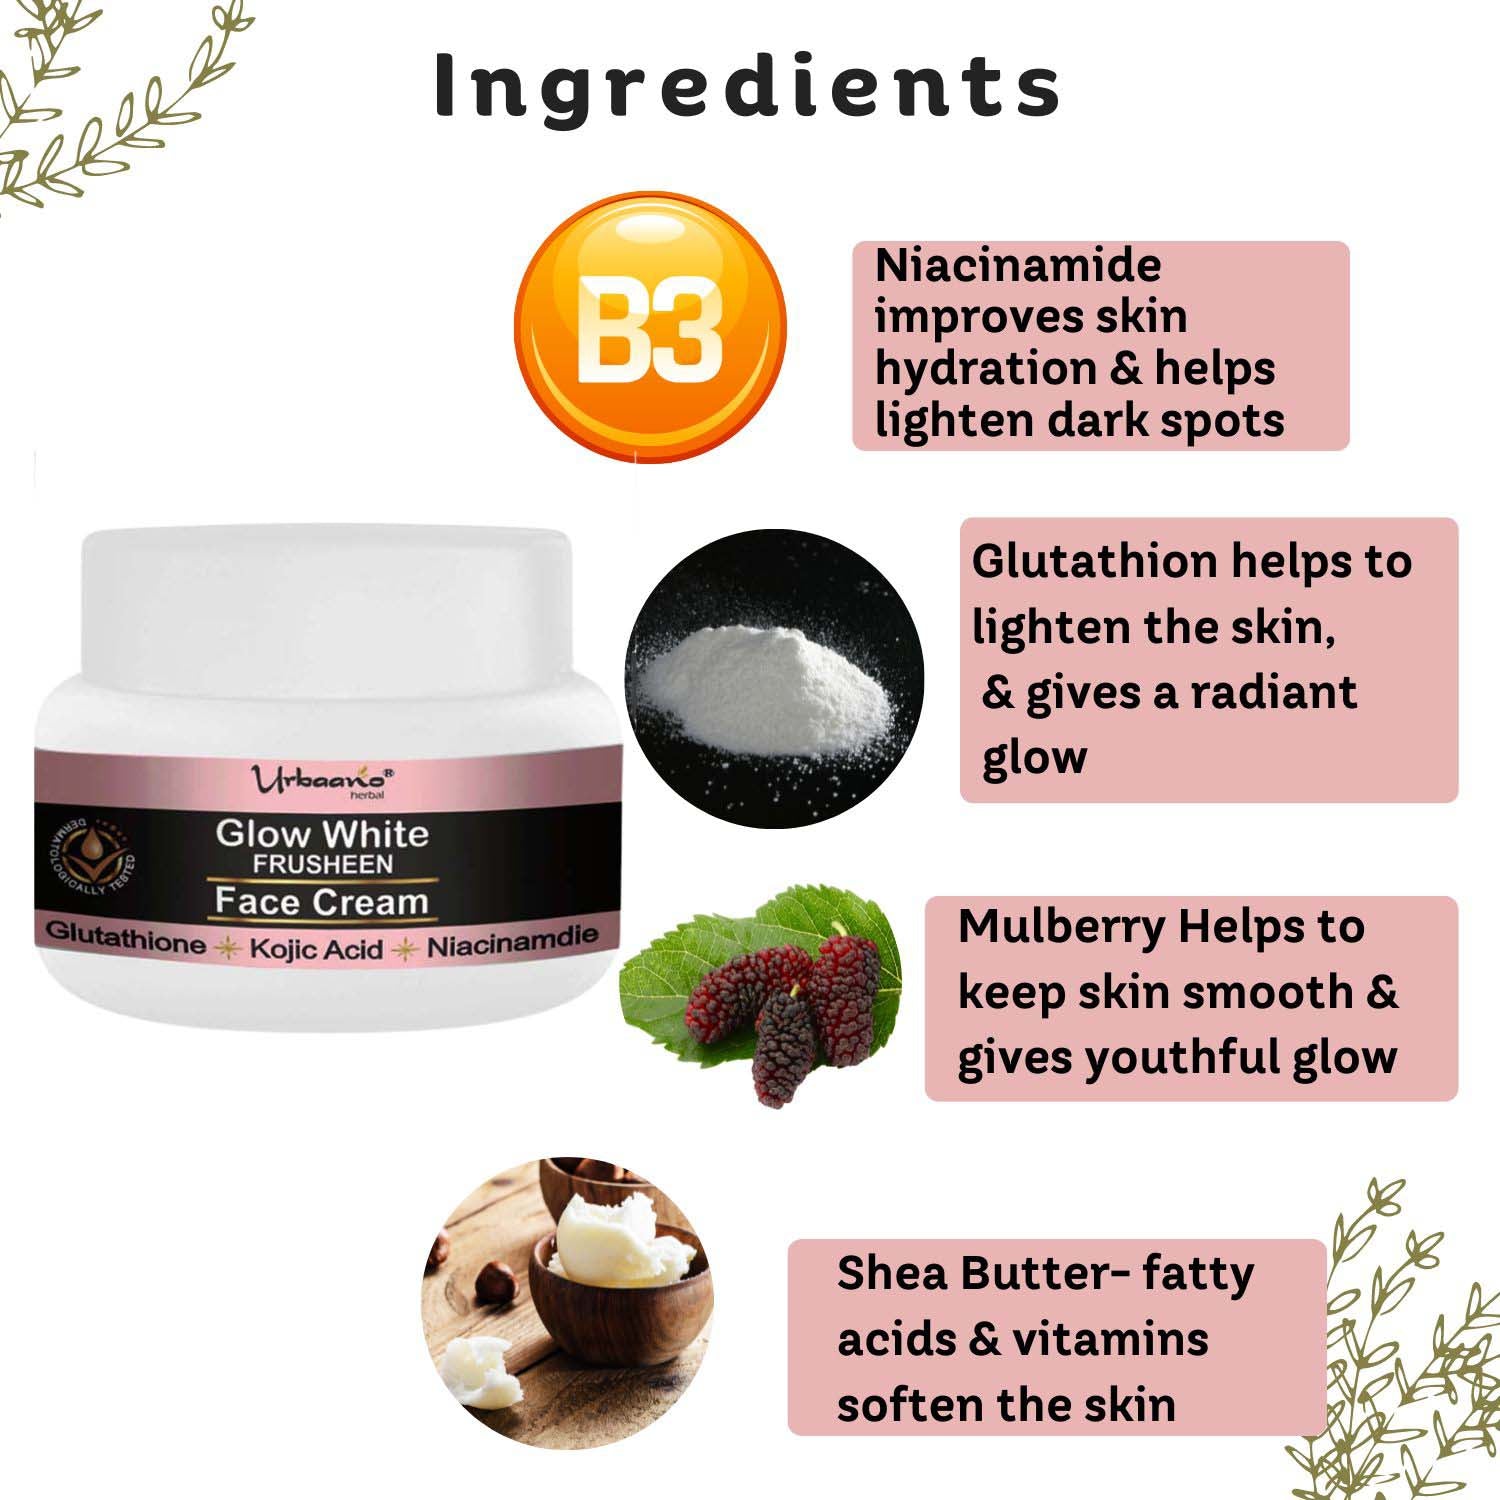 urbaano herbal frusheen glow white face cream with glutathion, mulberry, shea butter & hyaluronic acid to reduce dark spots, fine lines